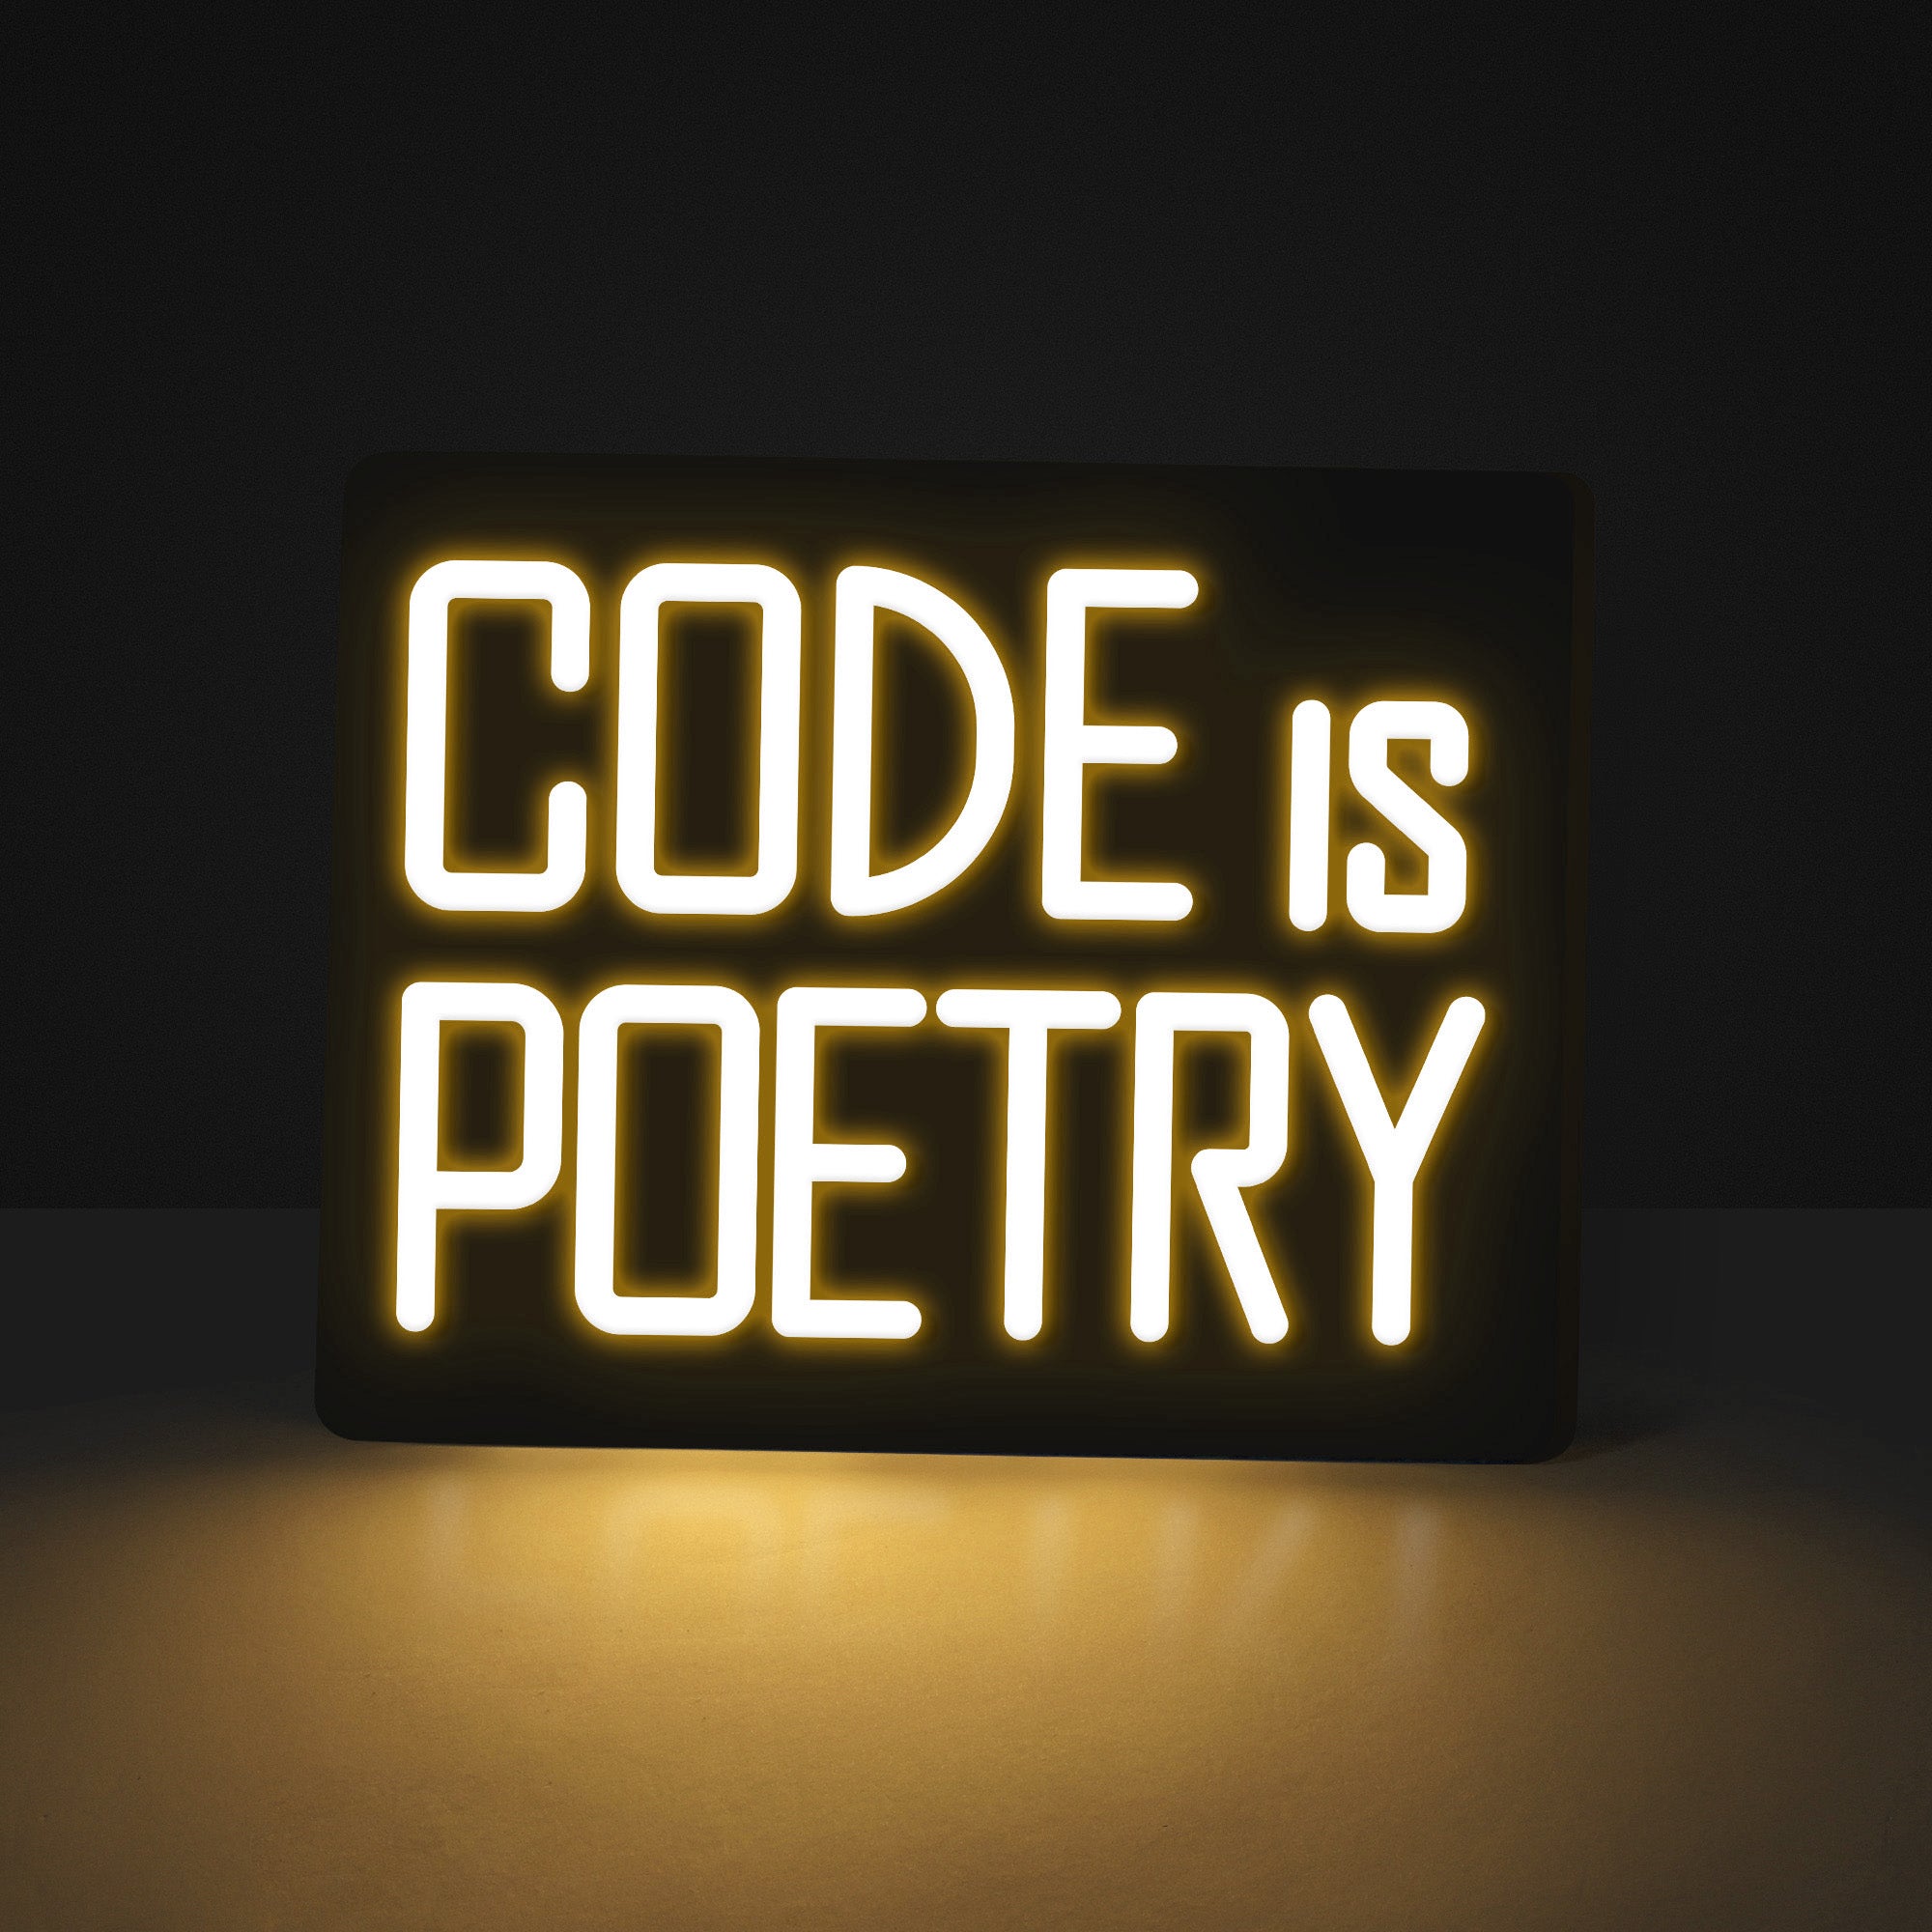 "CODE IS POETRY" Quote Neon Sign for Developers